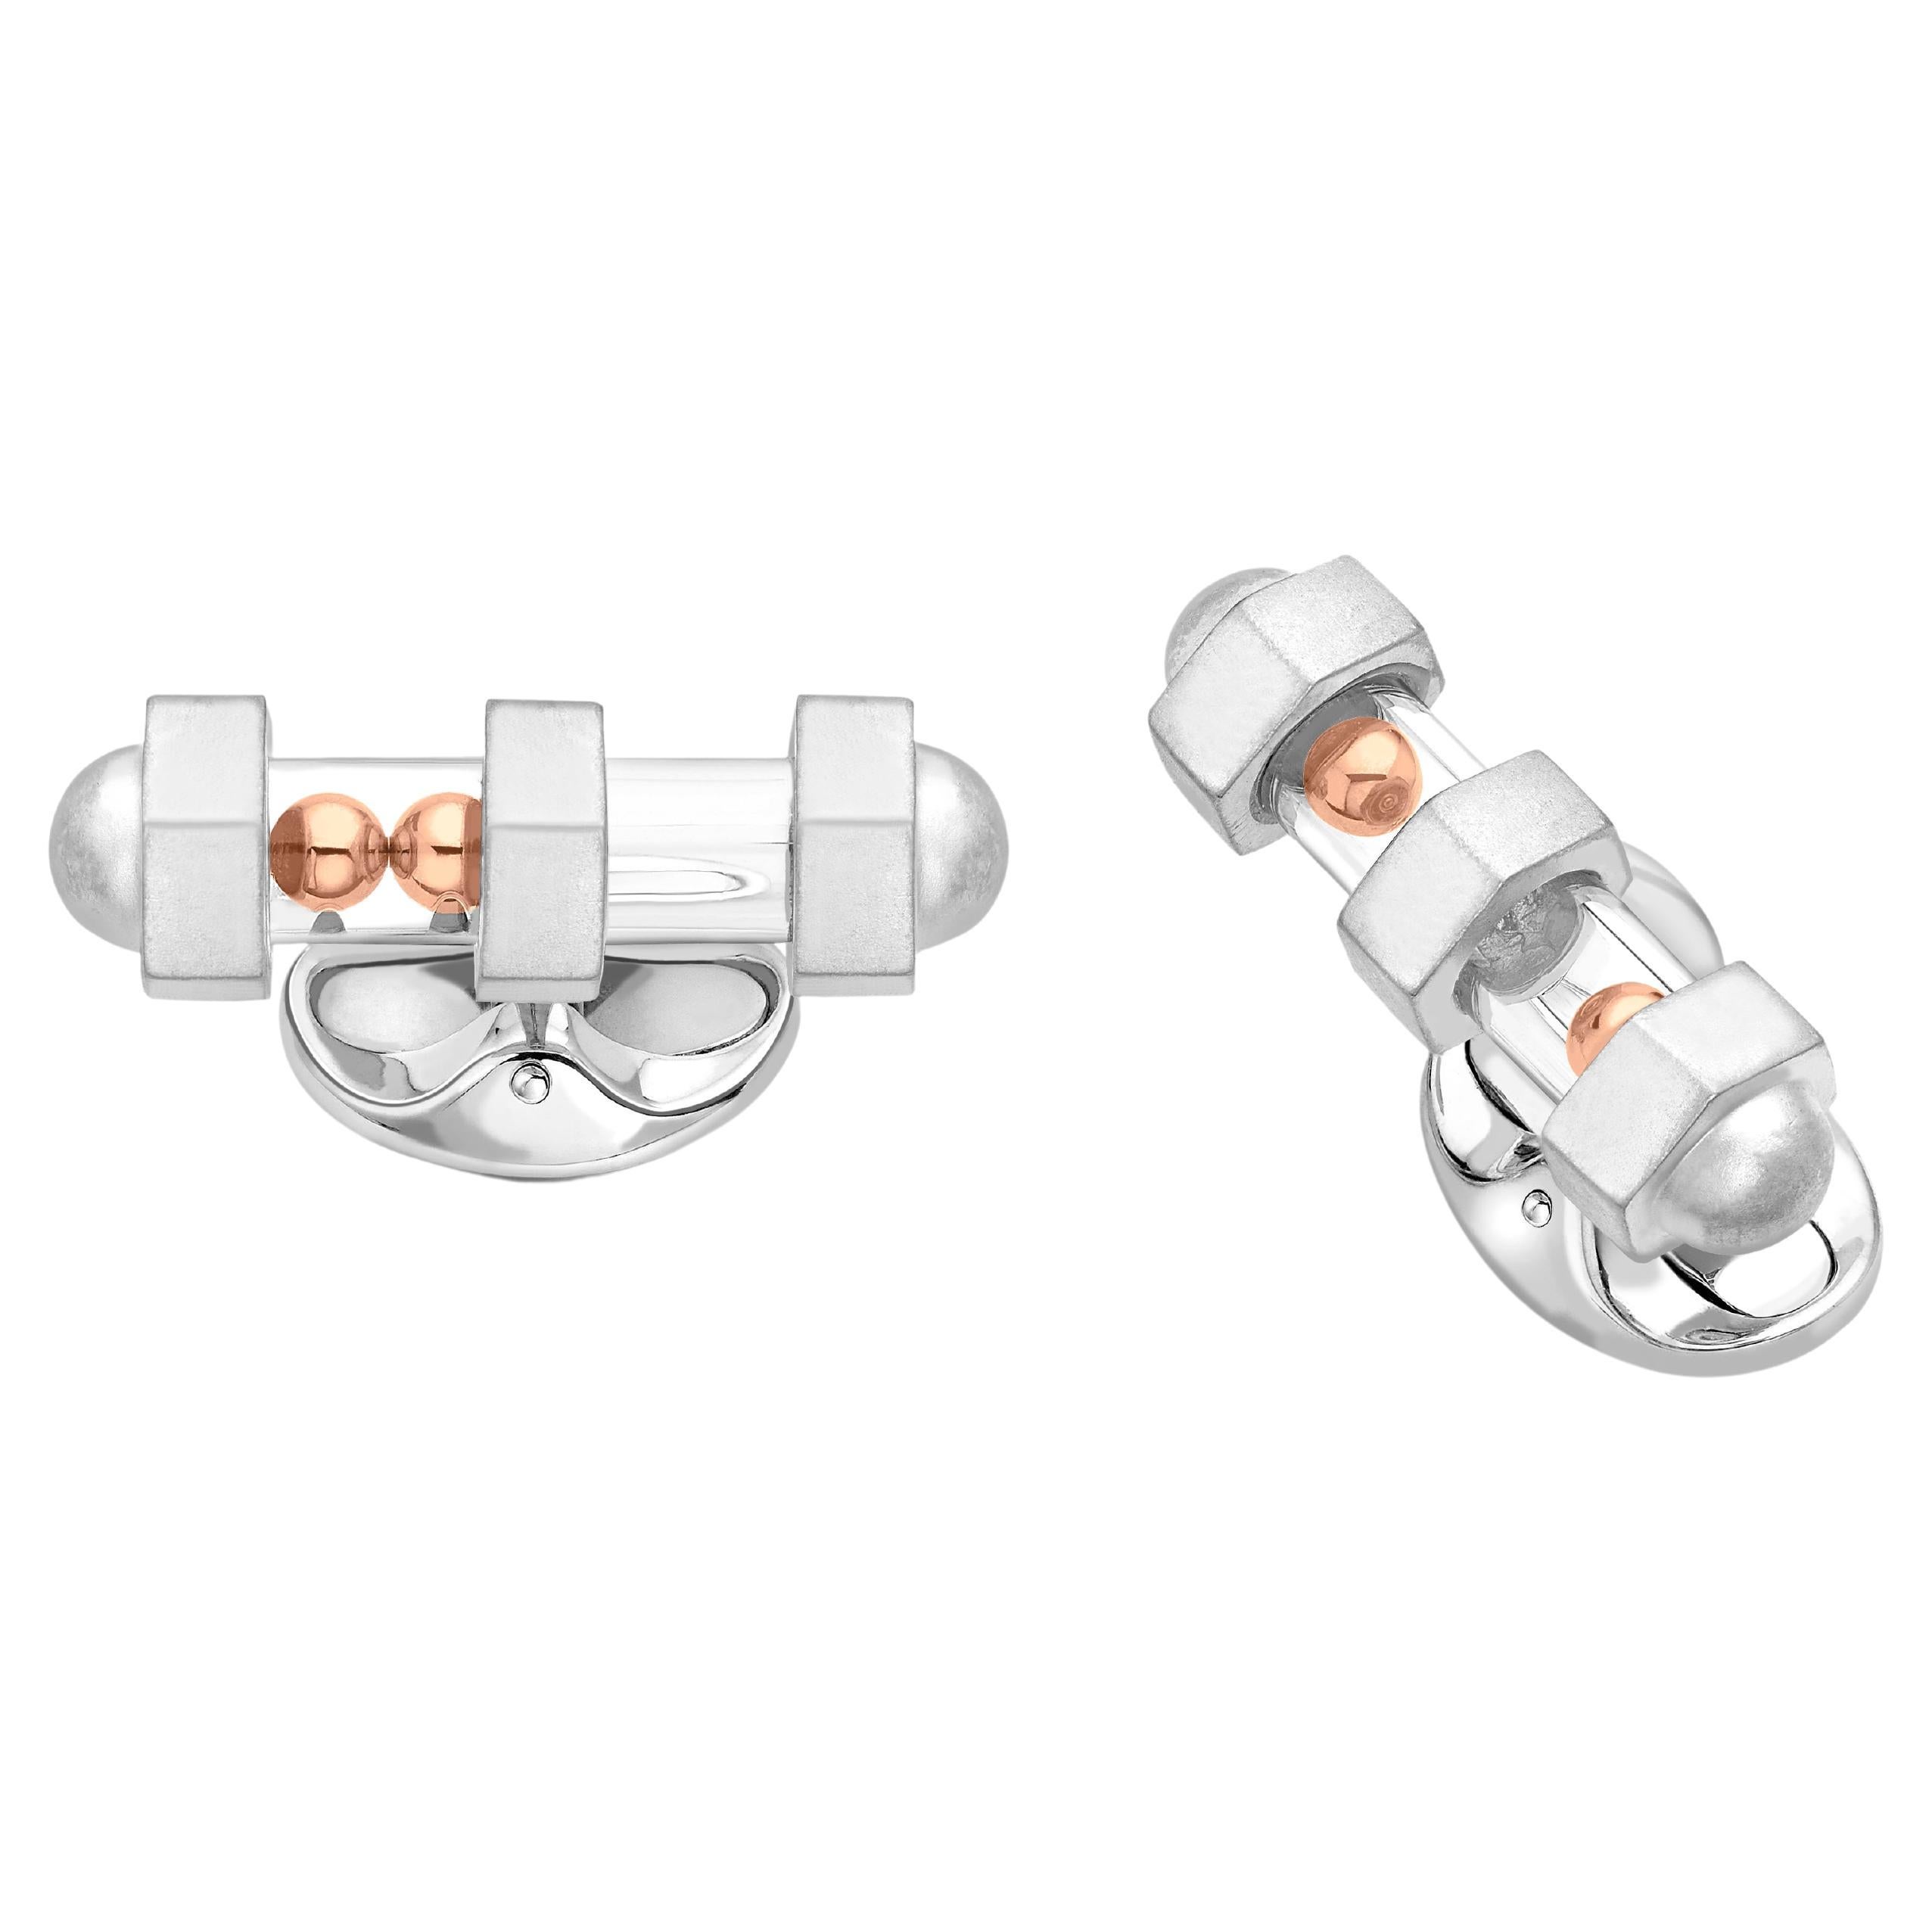 Deakin & Francis Sterling Silver Fuse Cufflinks with Glass Bar